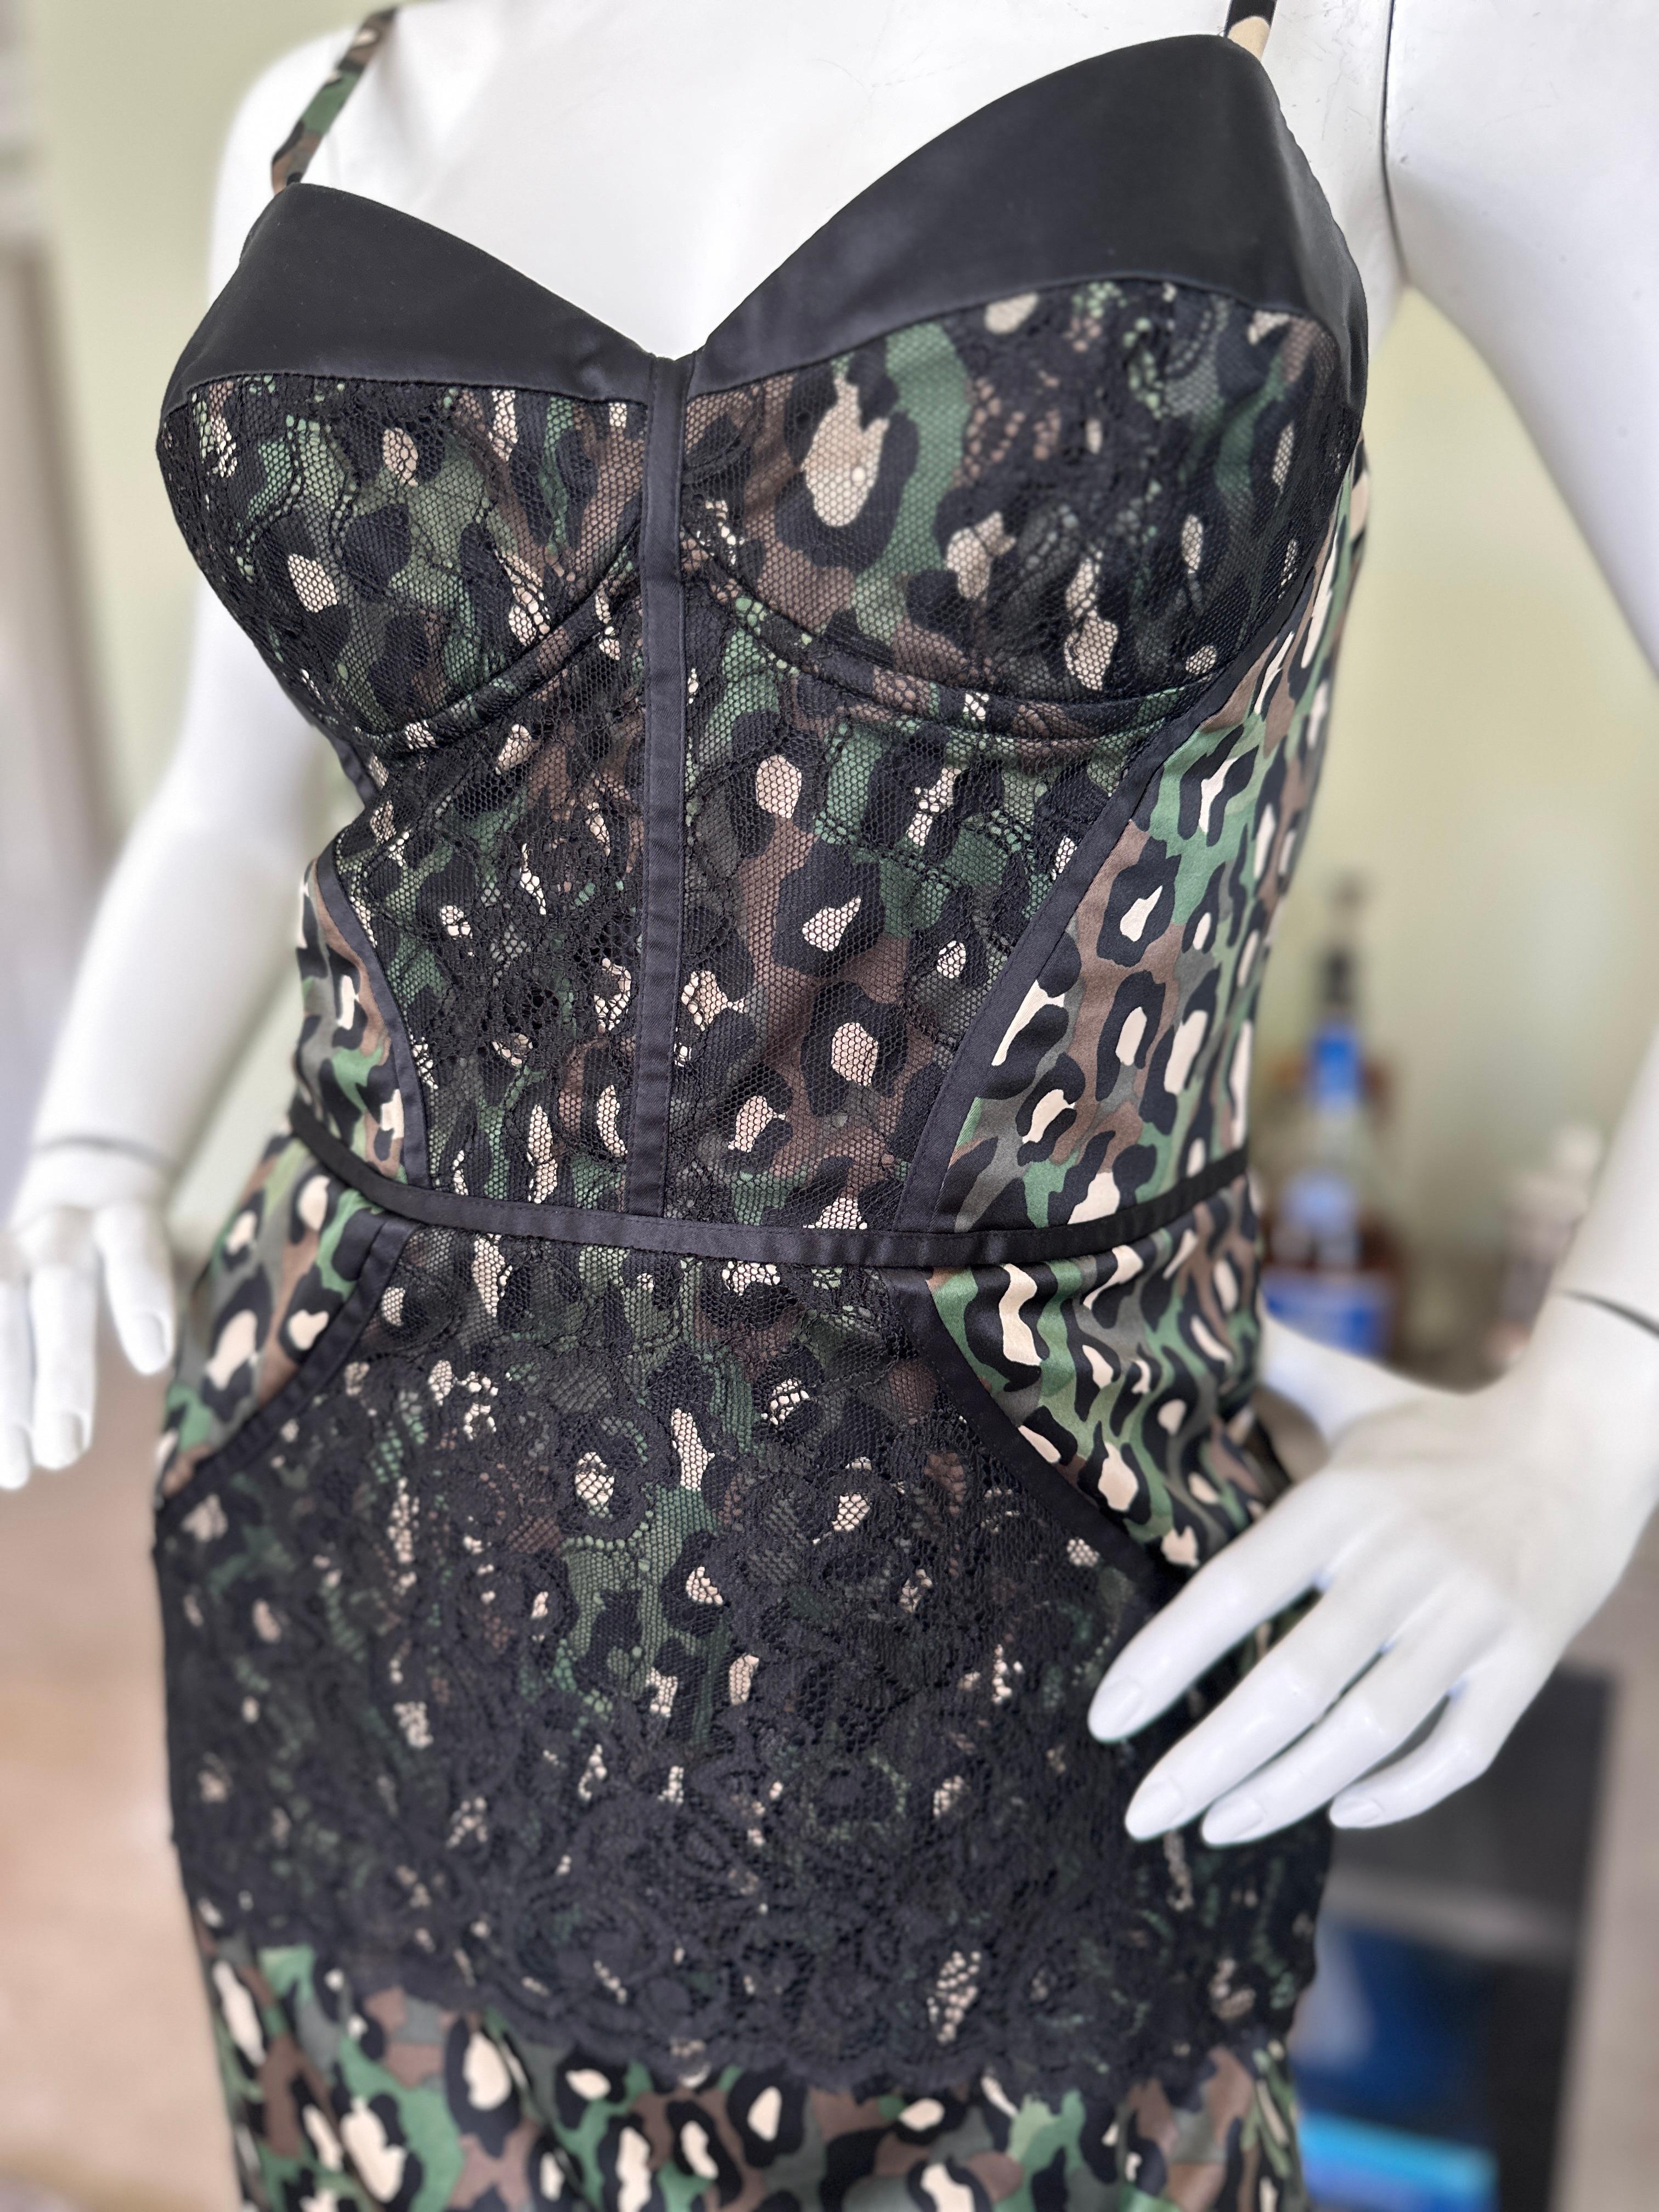 Just Cavalli Camo Leopard Print Corset Cocktail Dress by Roberto Cavalli In Excellent Condition For Sale In Cloverdale, CA